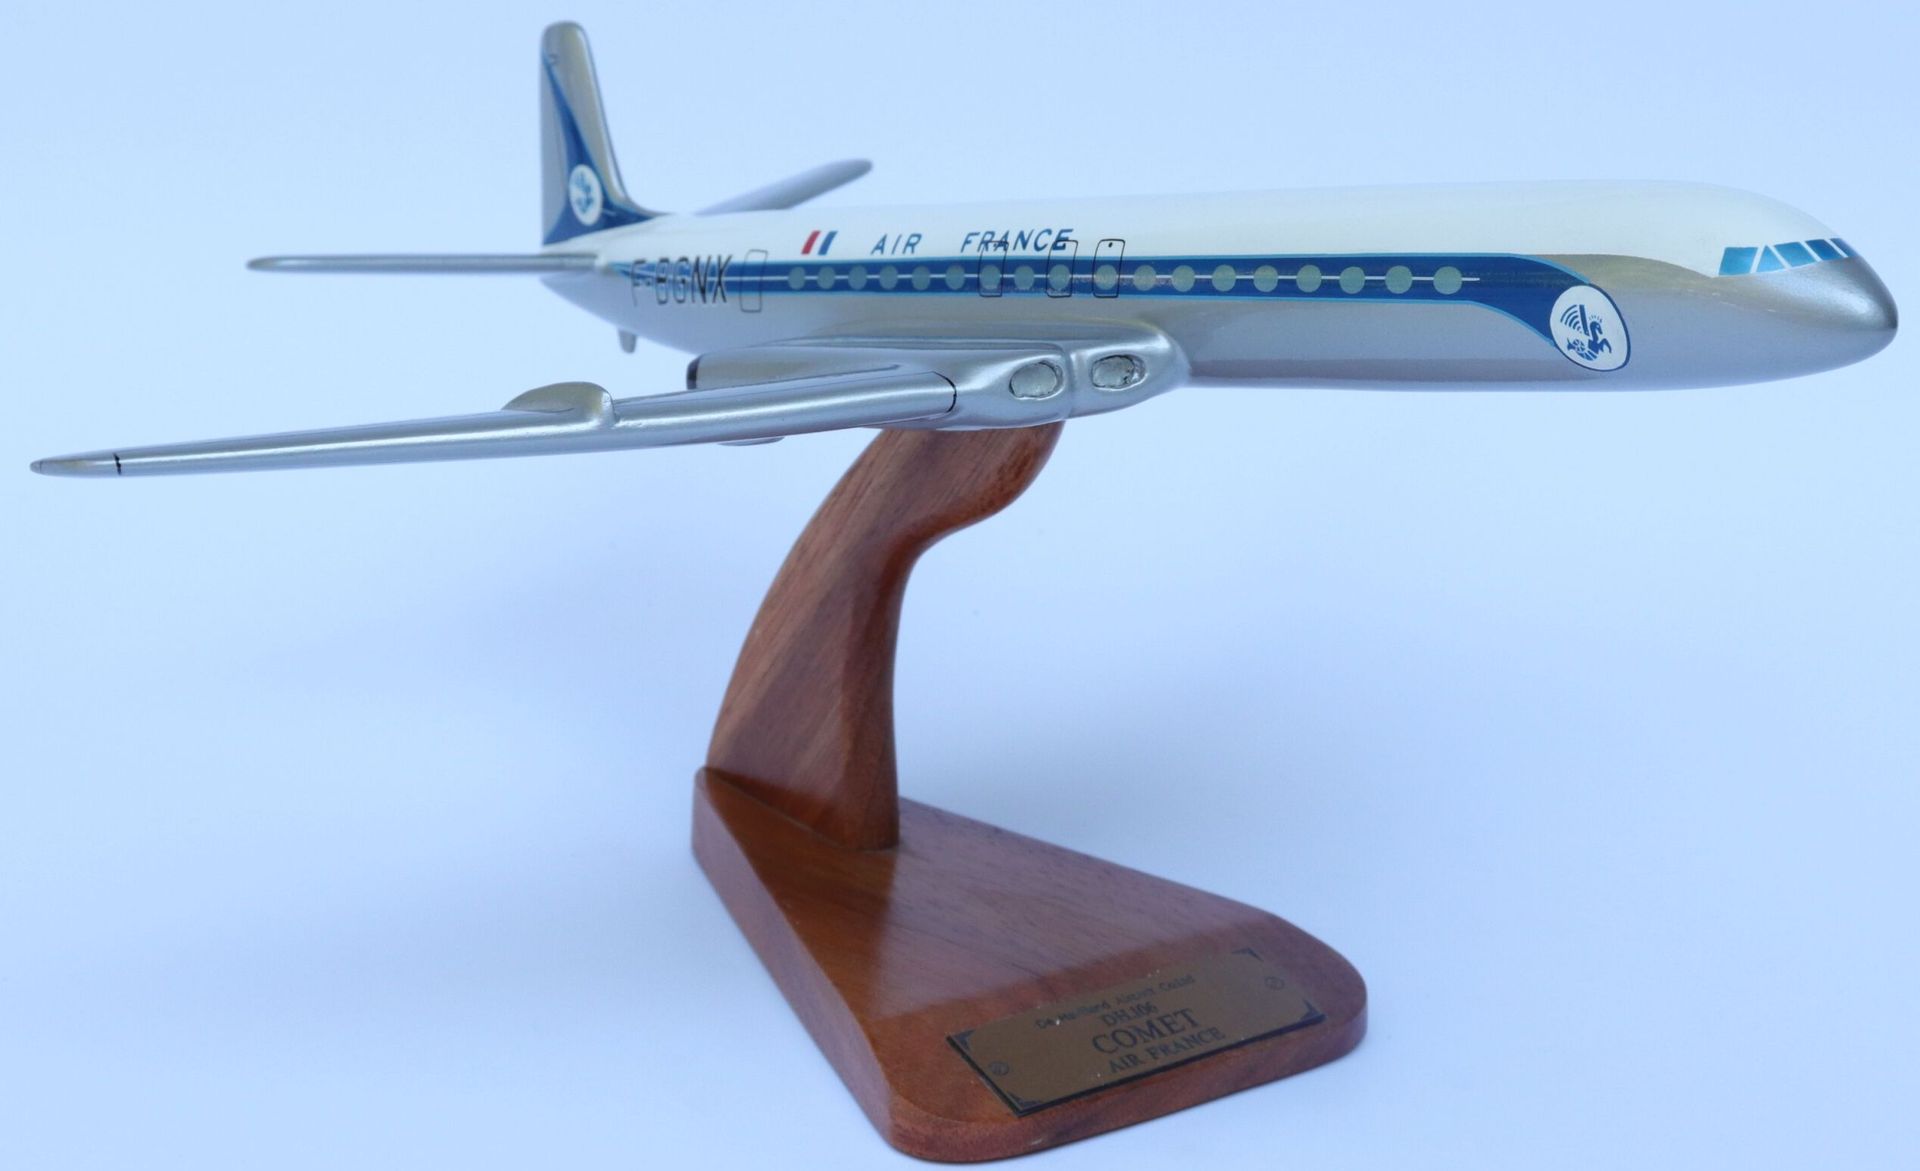 Null DE HAVILLAND DH 106 COMET AIR FRANCE.

Painted wooden model with registrati&hellip;